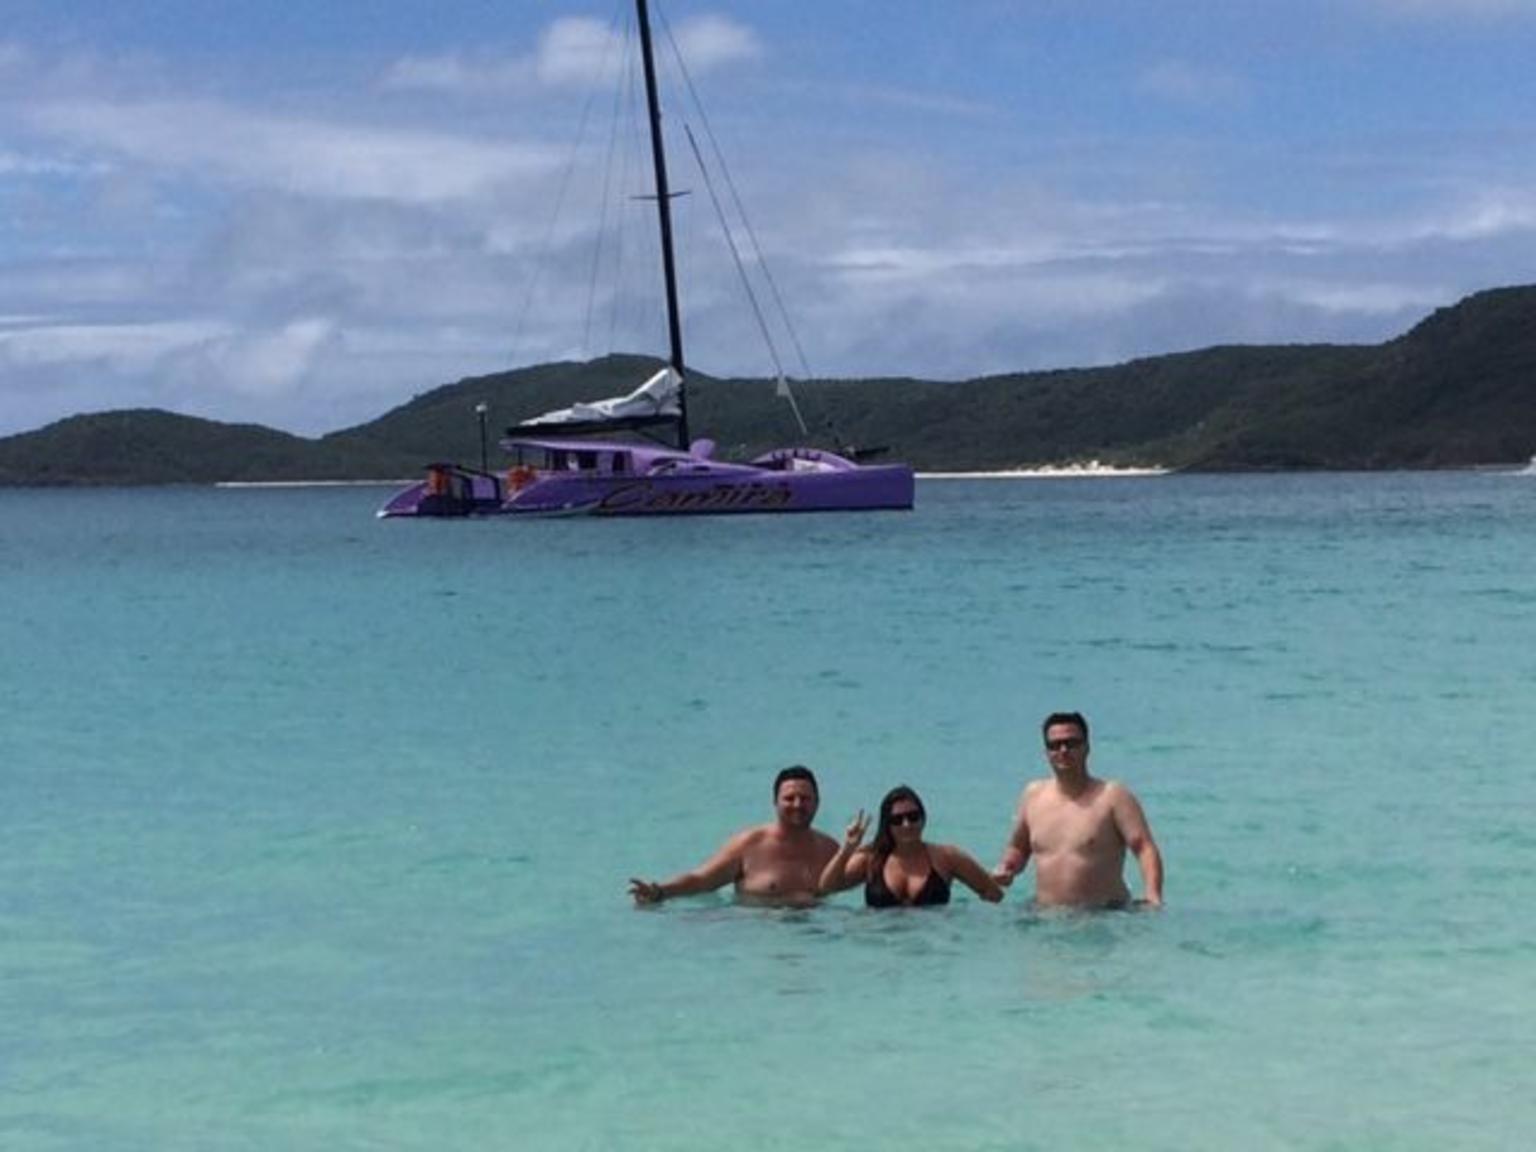 Fun in the sun at Whitehaven Beach with our boat Camira in the background